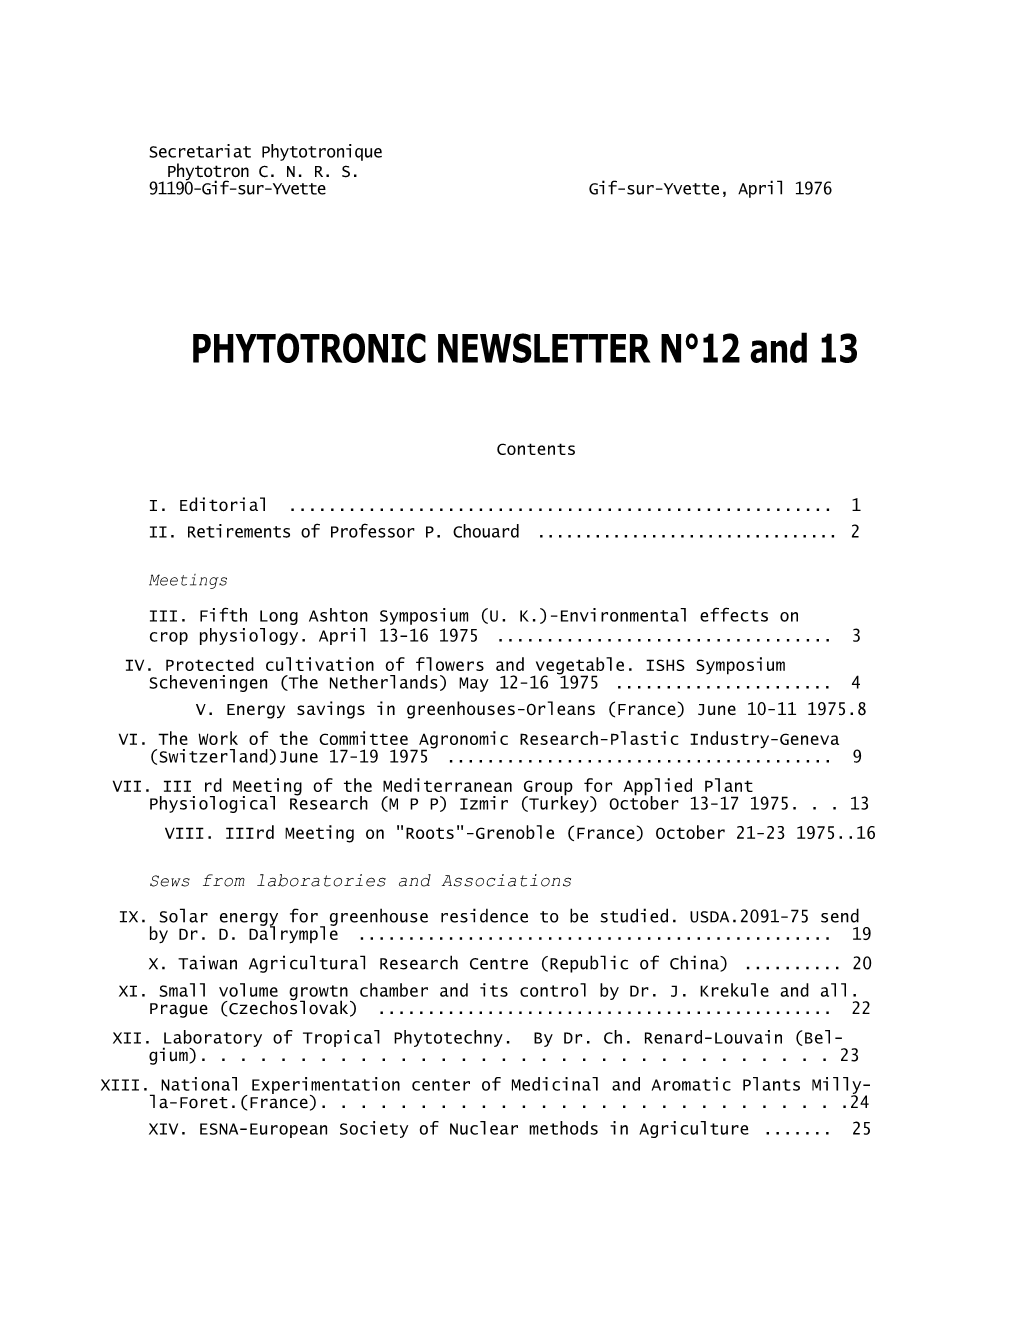 PHYTOTRONIC NEWSLETTER N°12 and 13